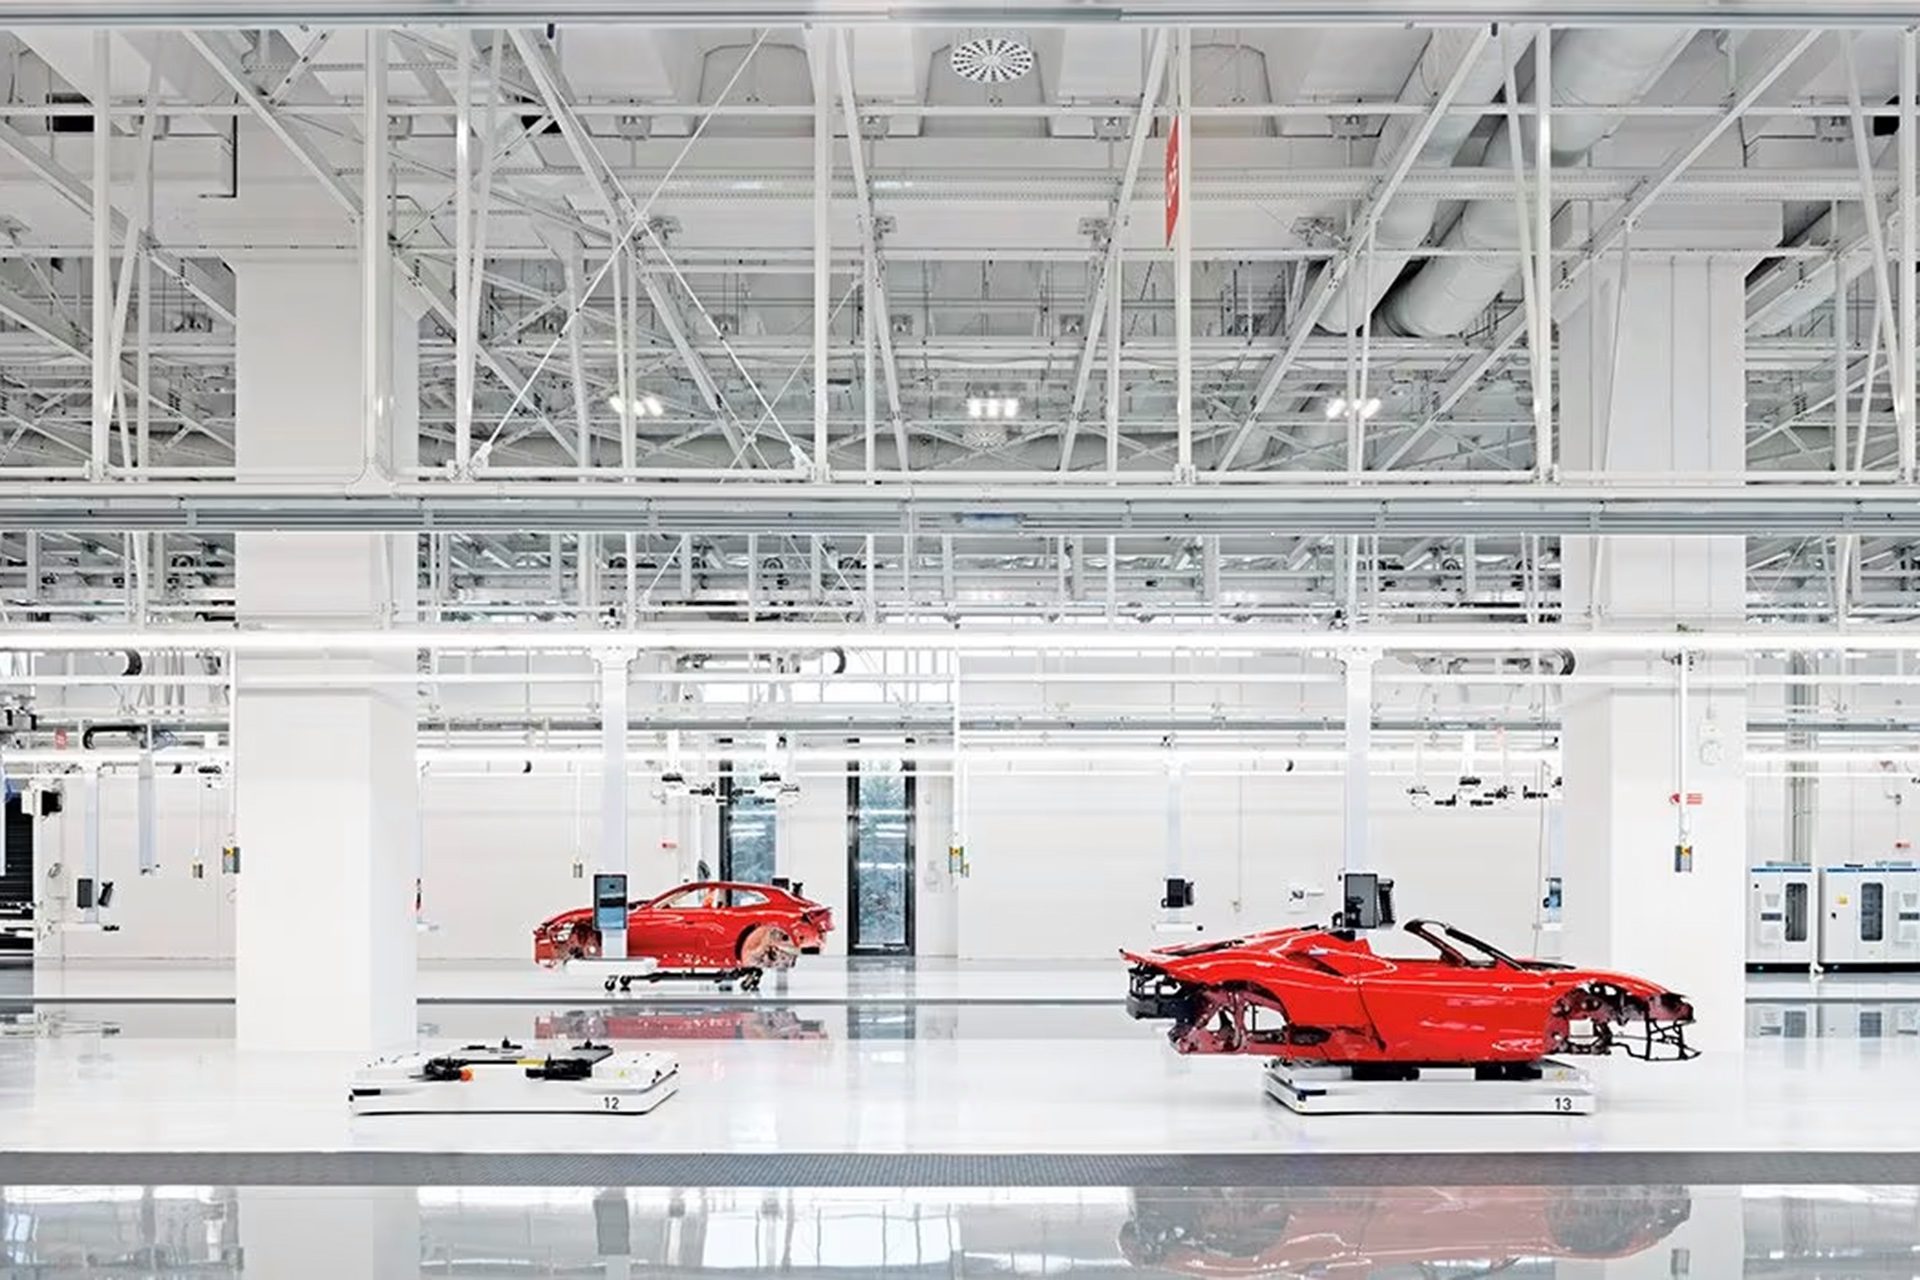 Ferrari's new e-building is opening any day now.